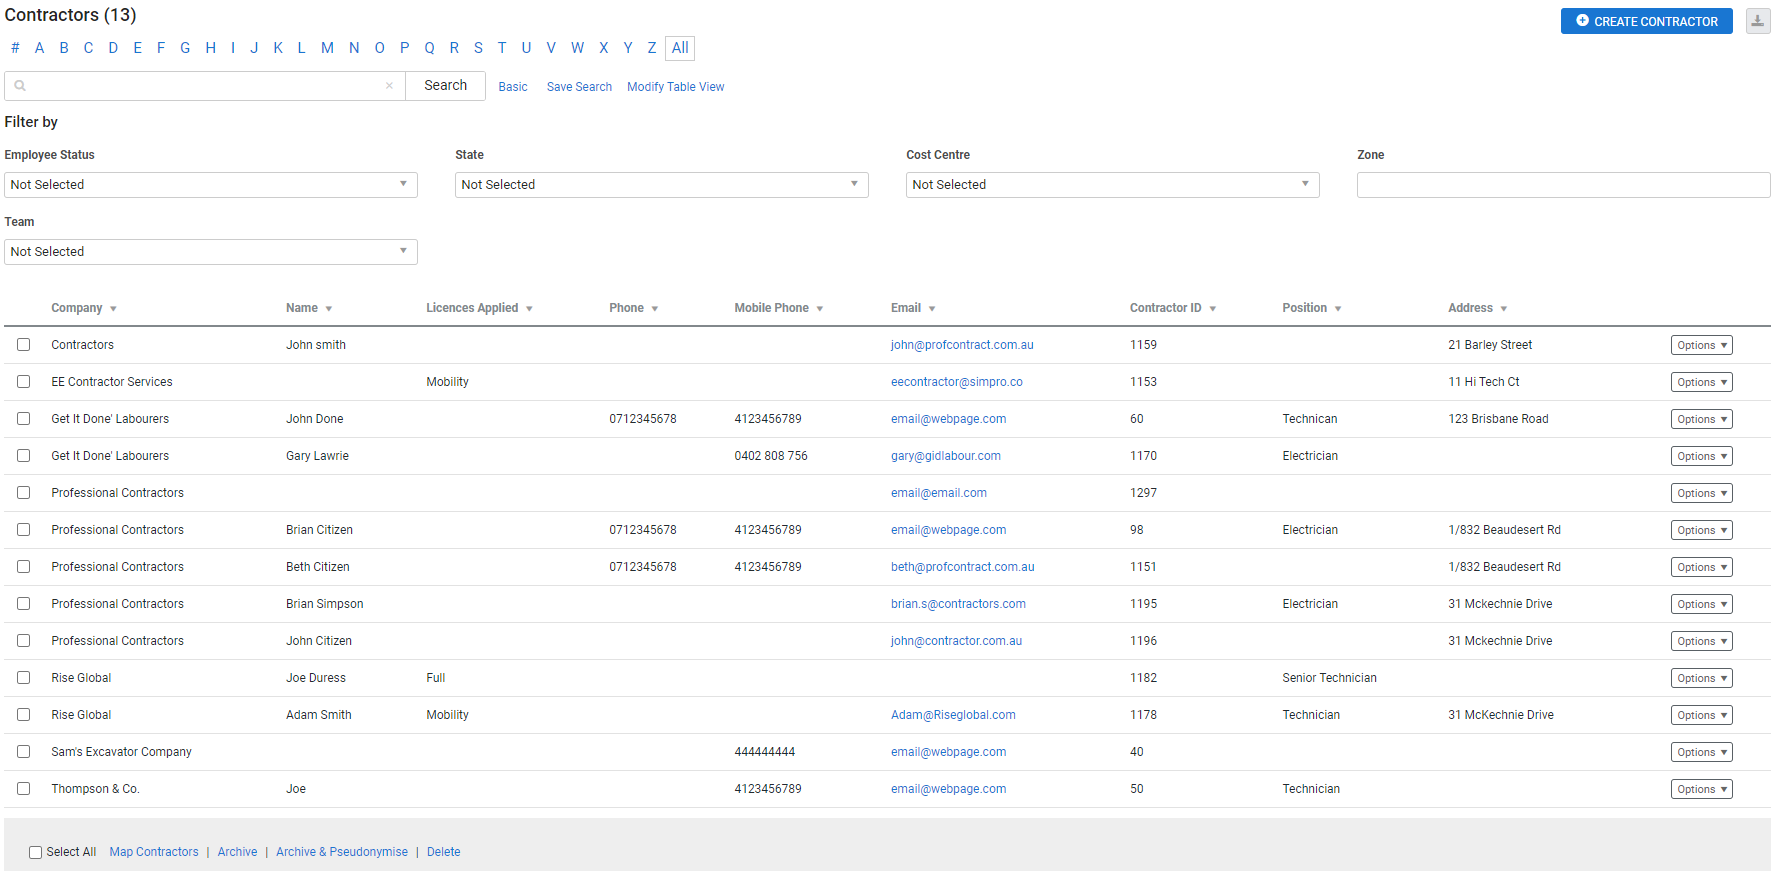 A screenshot of an advanced search in the Contractors table.